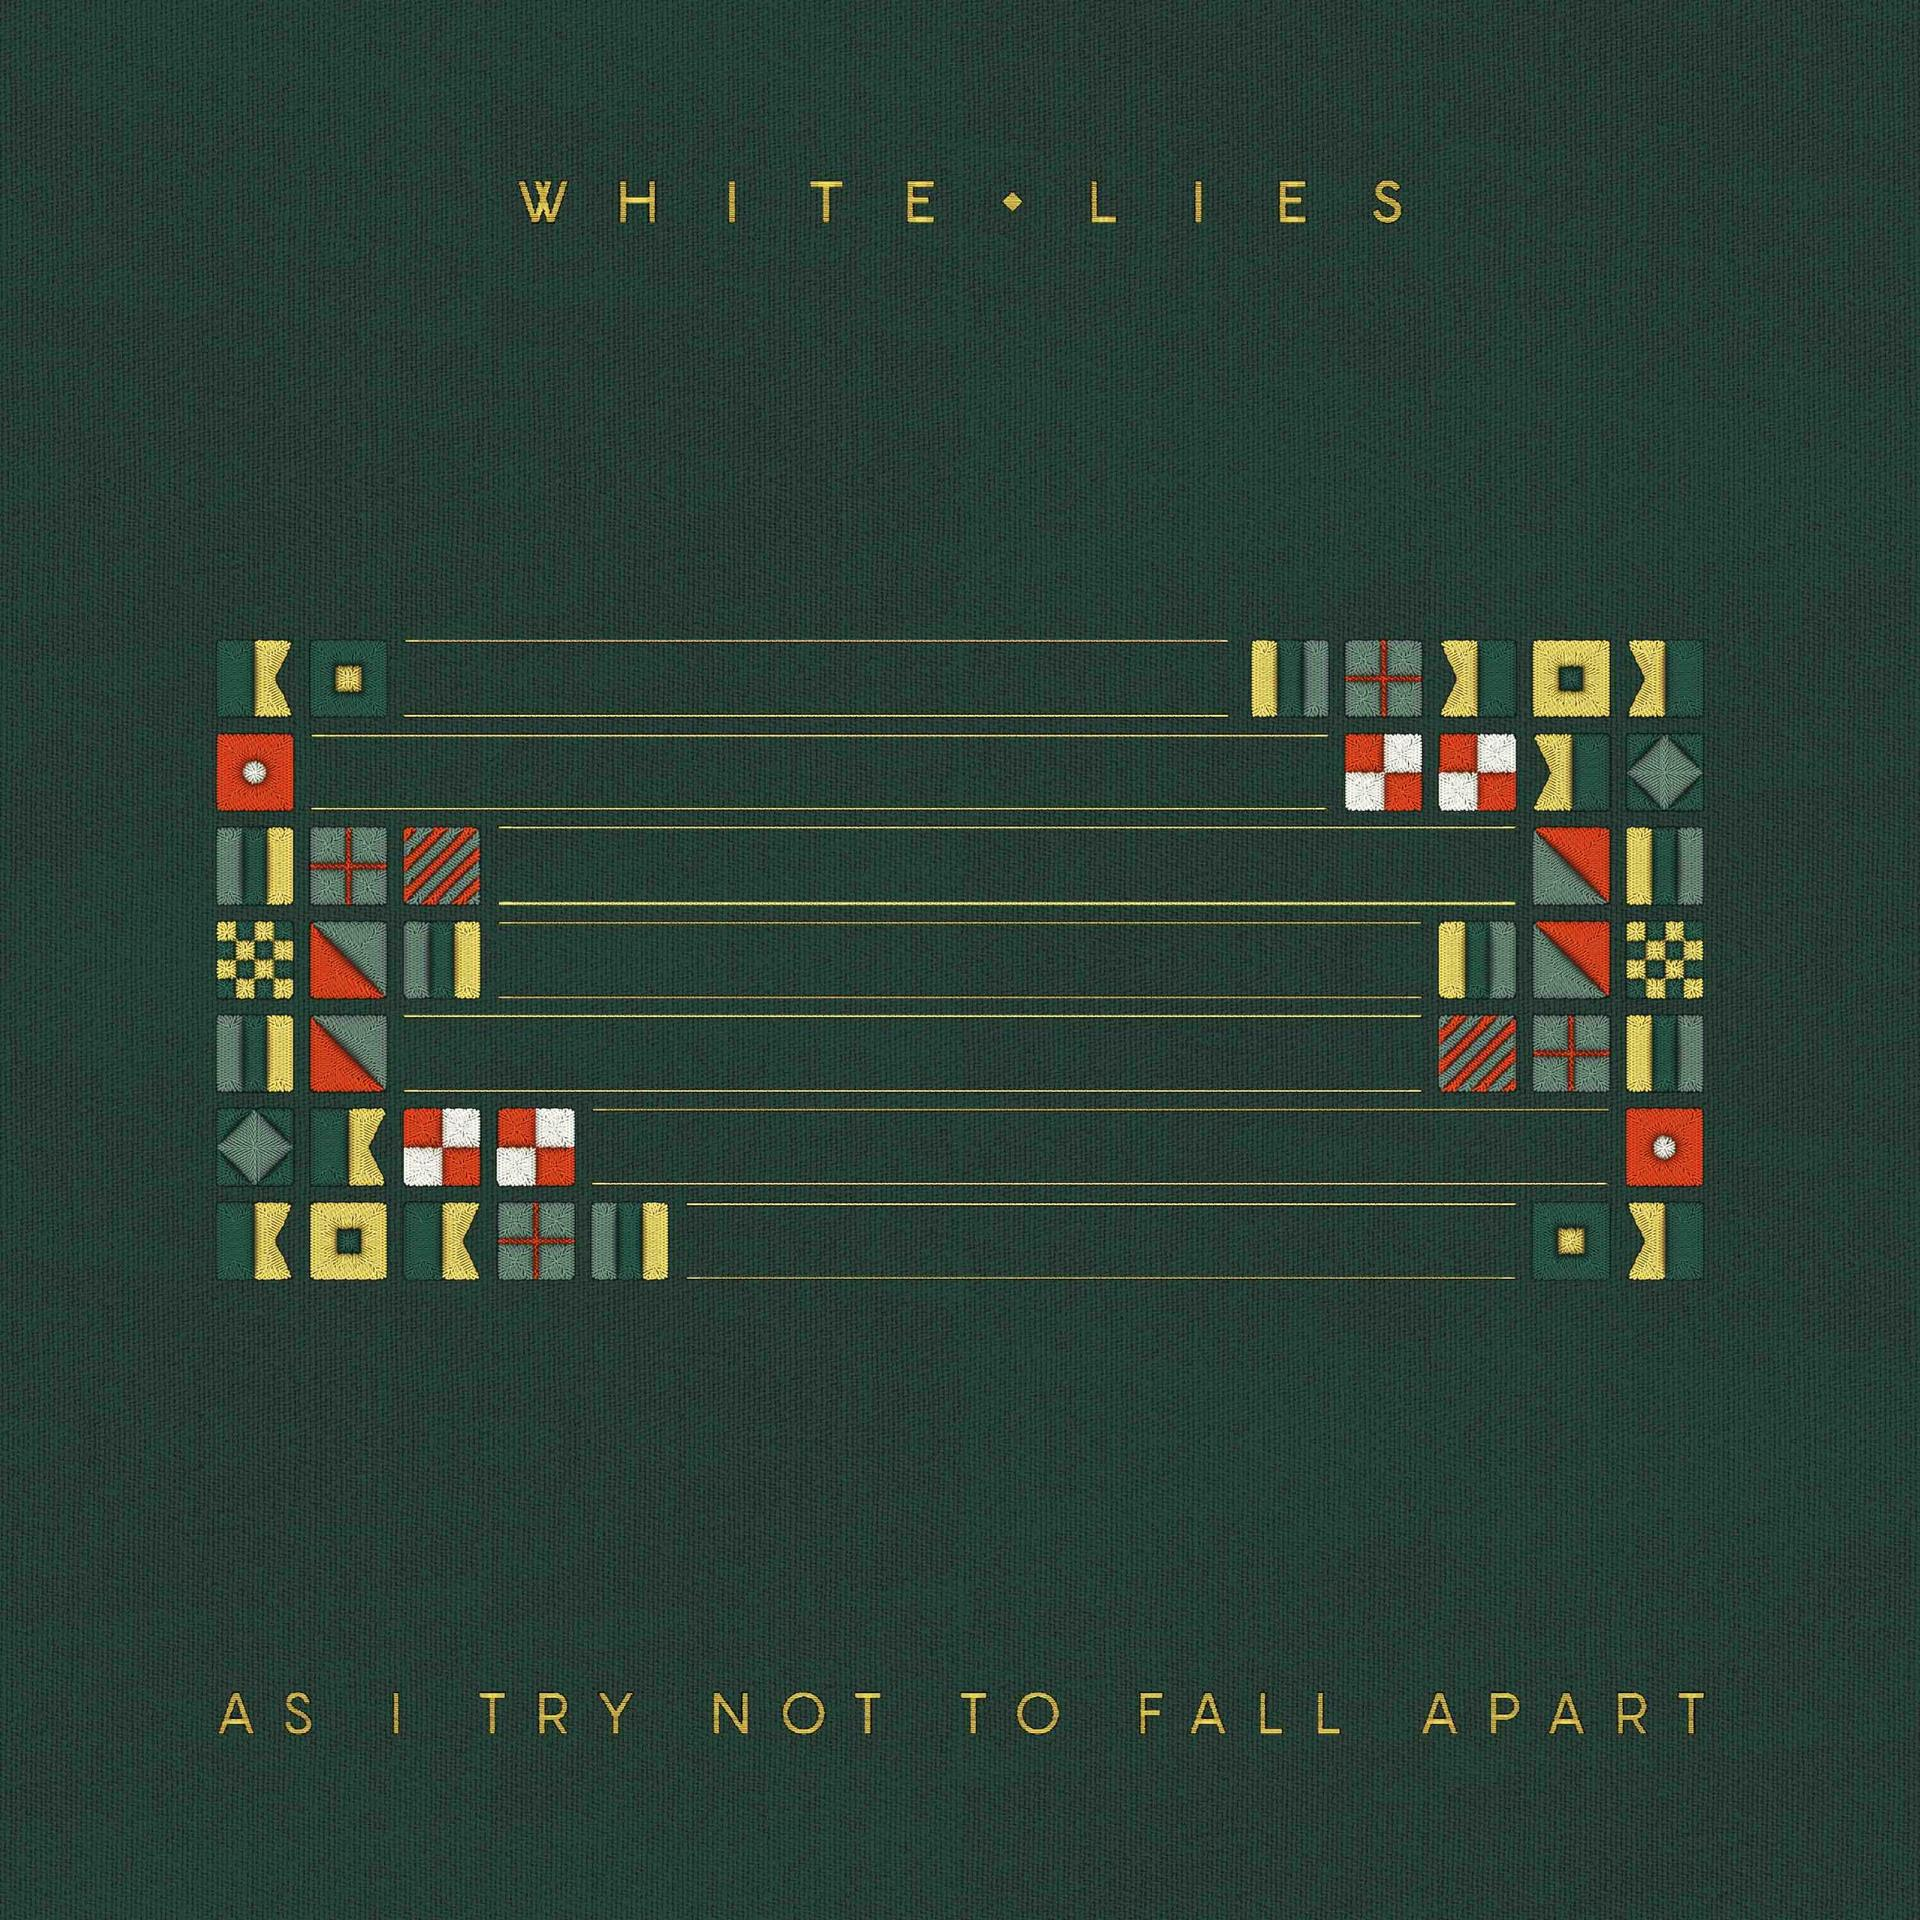 Apart Not Fall Lies Try - - I To White (CD) As